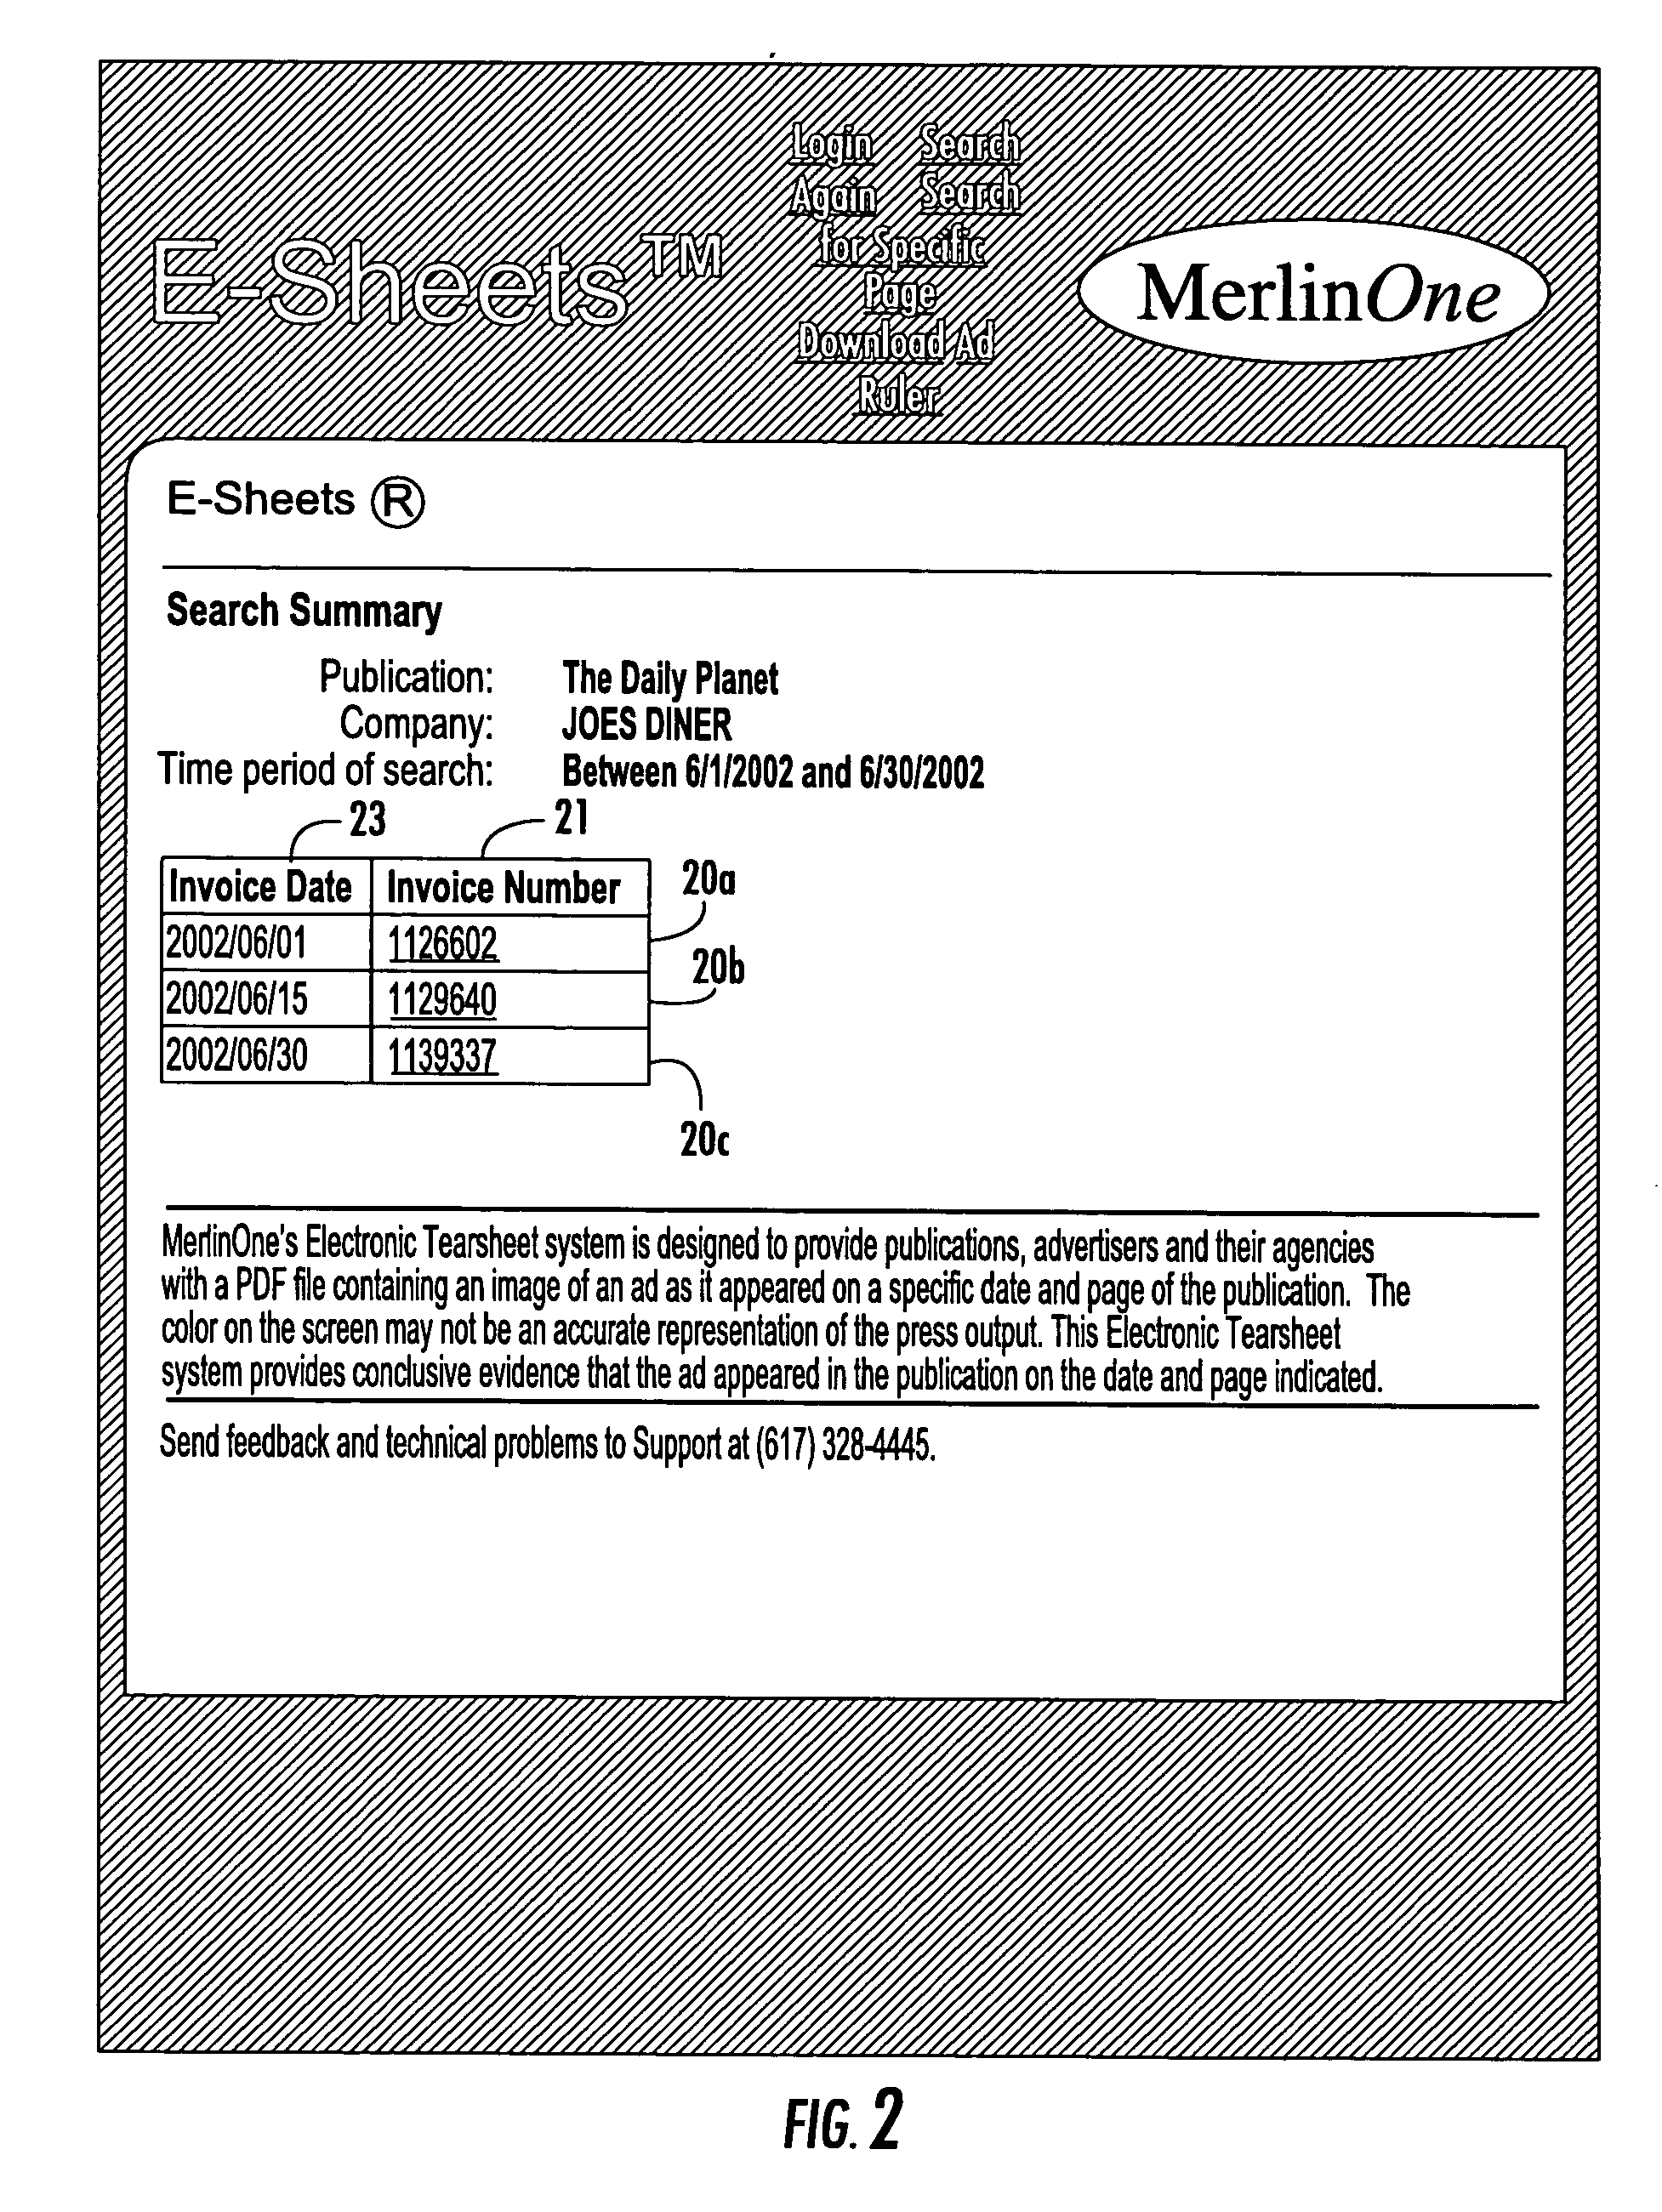 System and method for interrelating and storing advertisements, tearsheets, and invoices